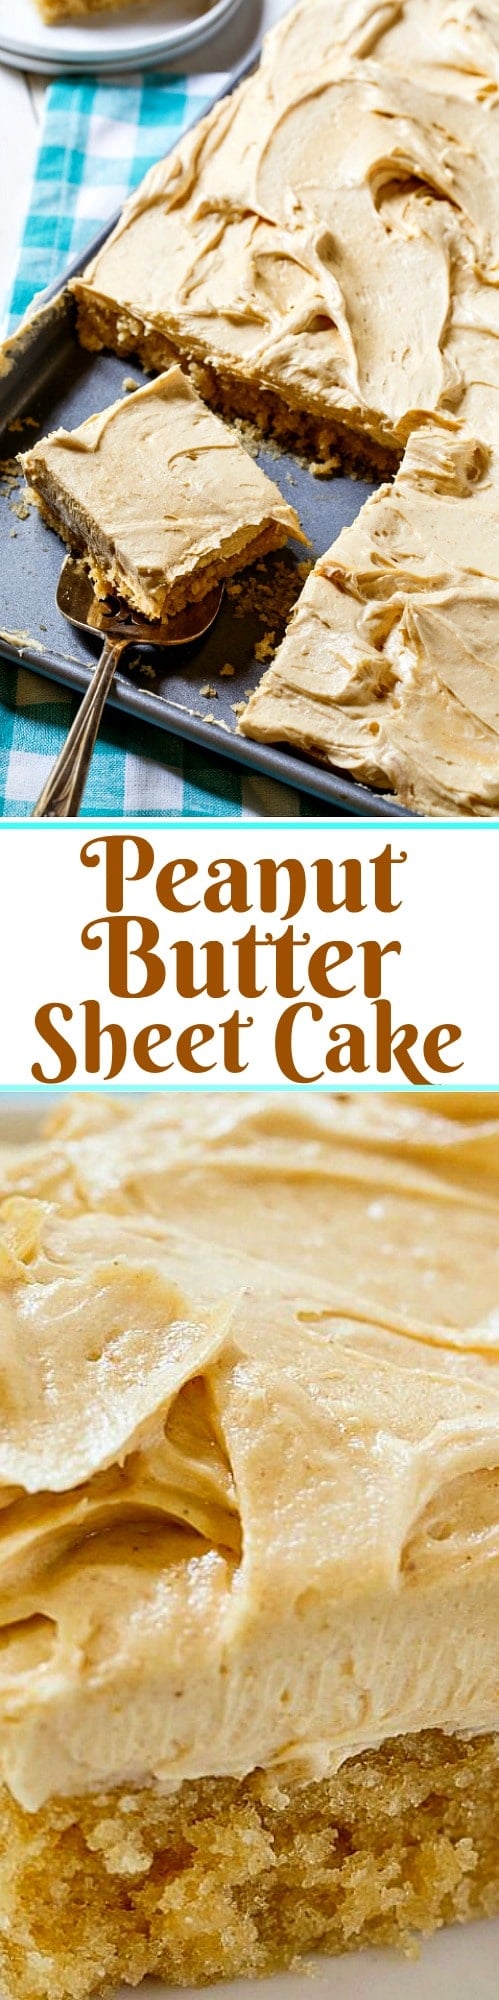 Peanut Butter Sheet Cake with a thick and fluffy peanut butter frosting.